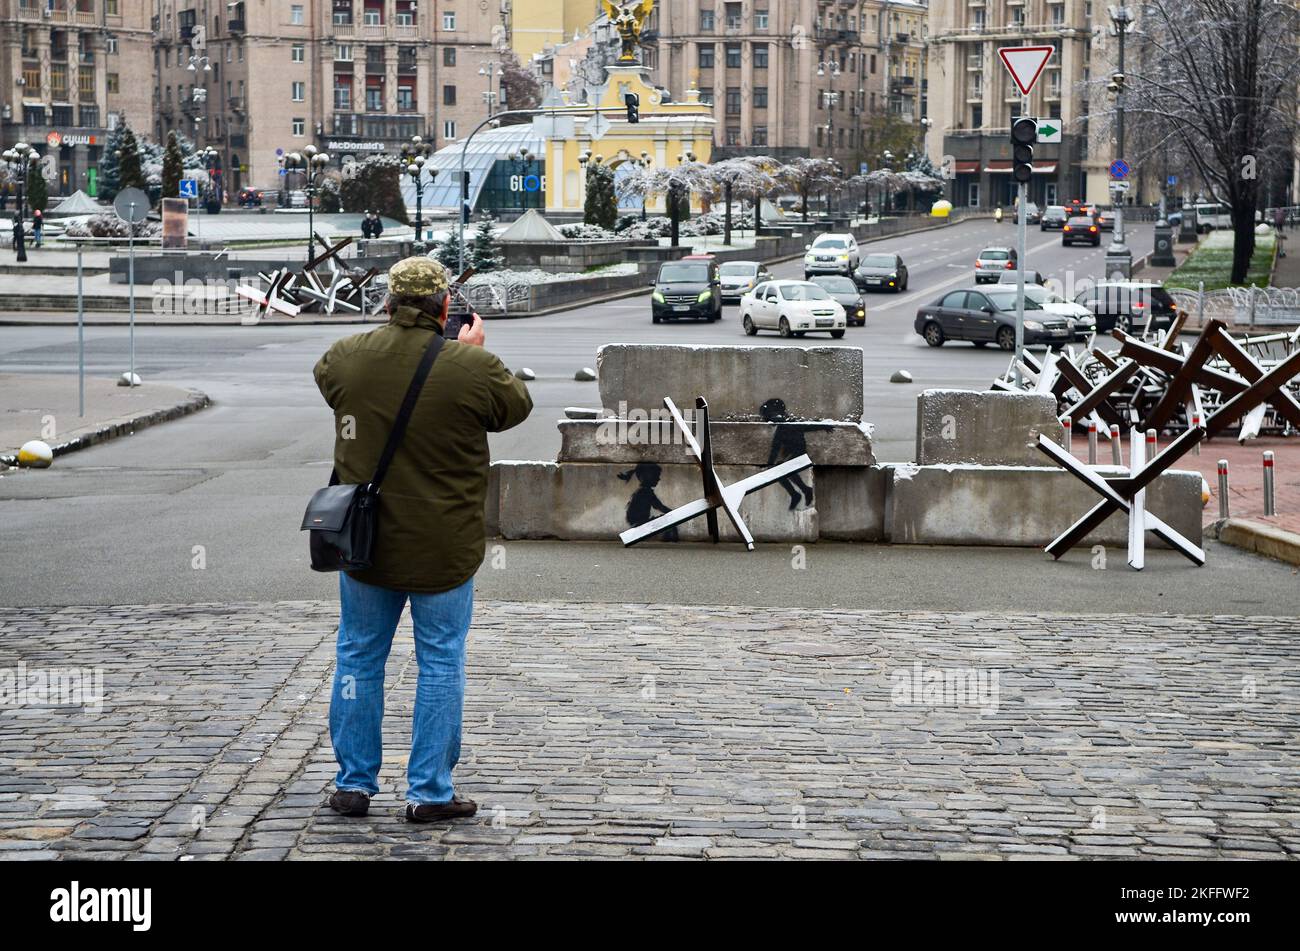 KYIV, UKRAINE - NOVEMBER 17, 2022 - A man takes a picture of the mural by England-based street artist Banksy which transforms an anti-tank obstacle (C Stock Photo